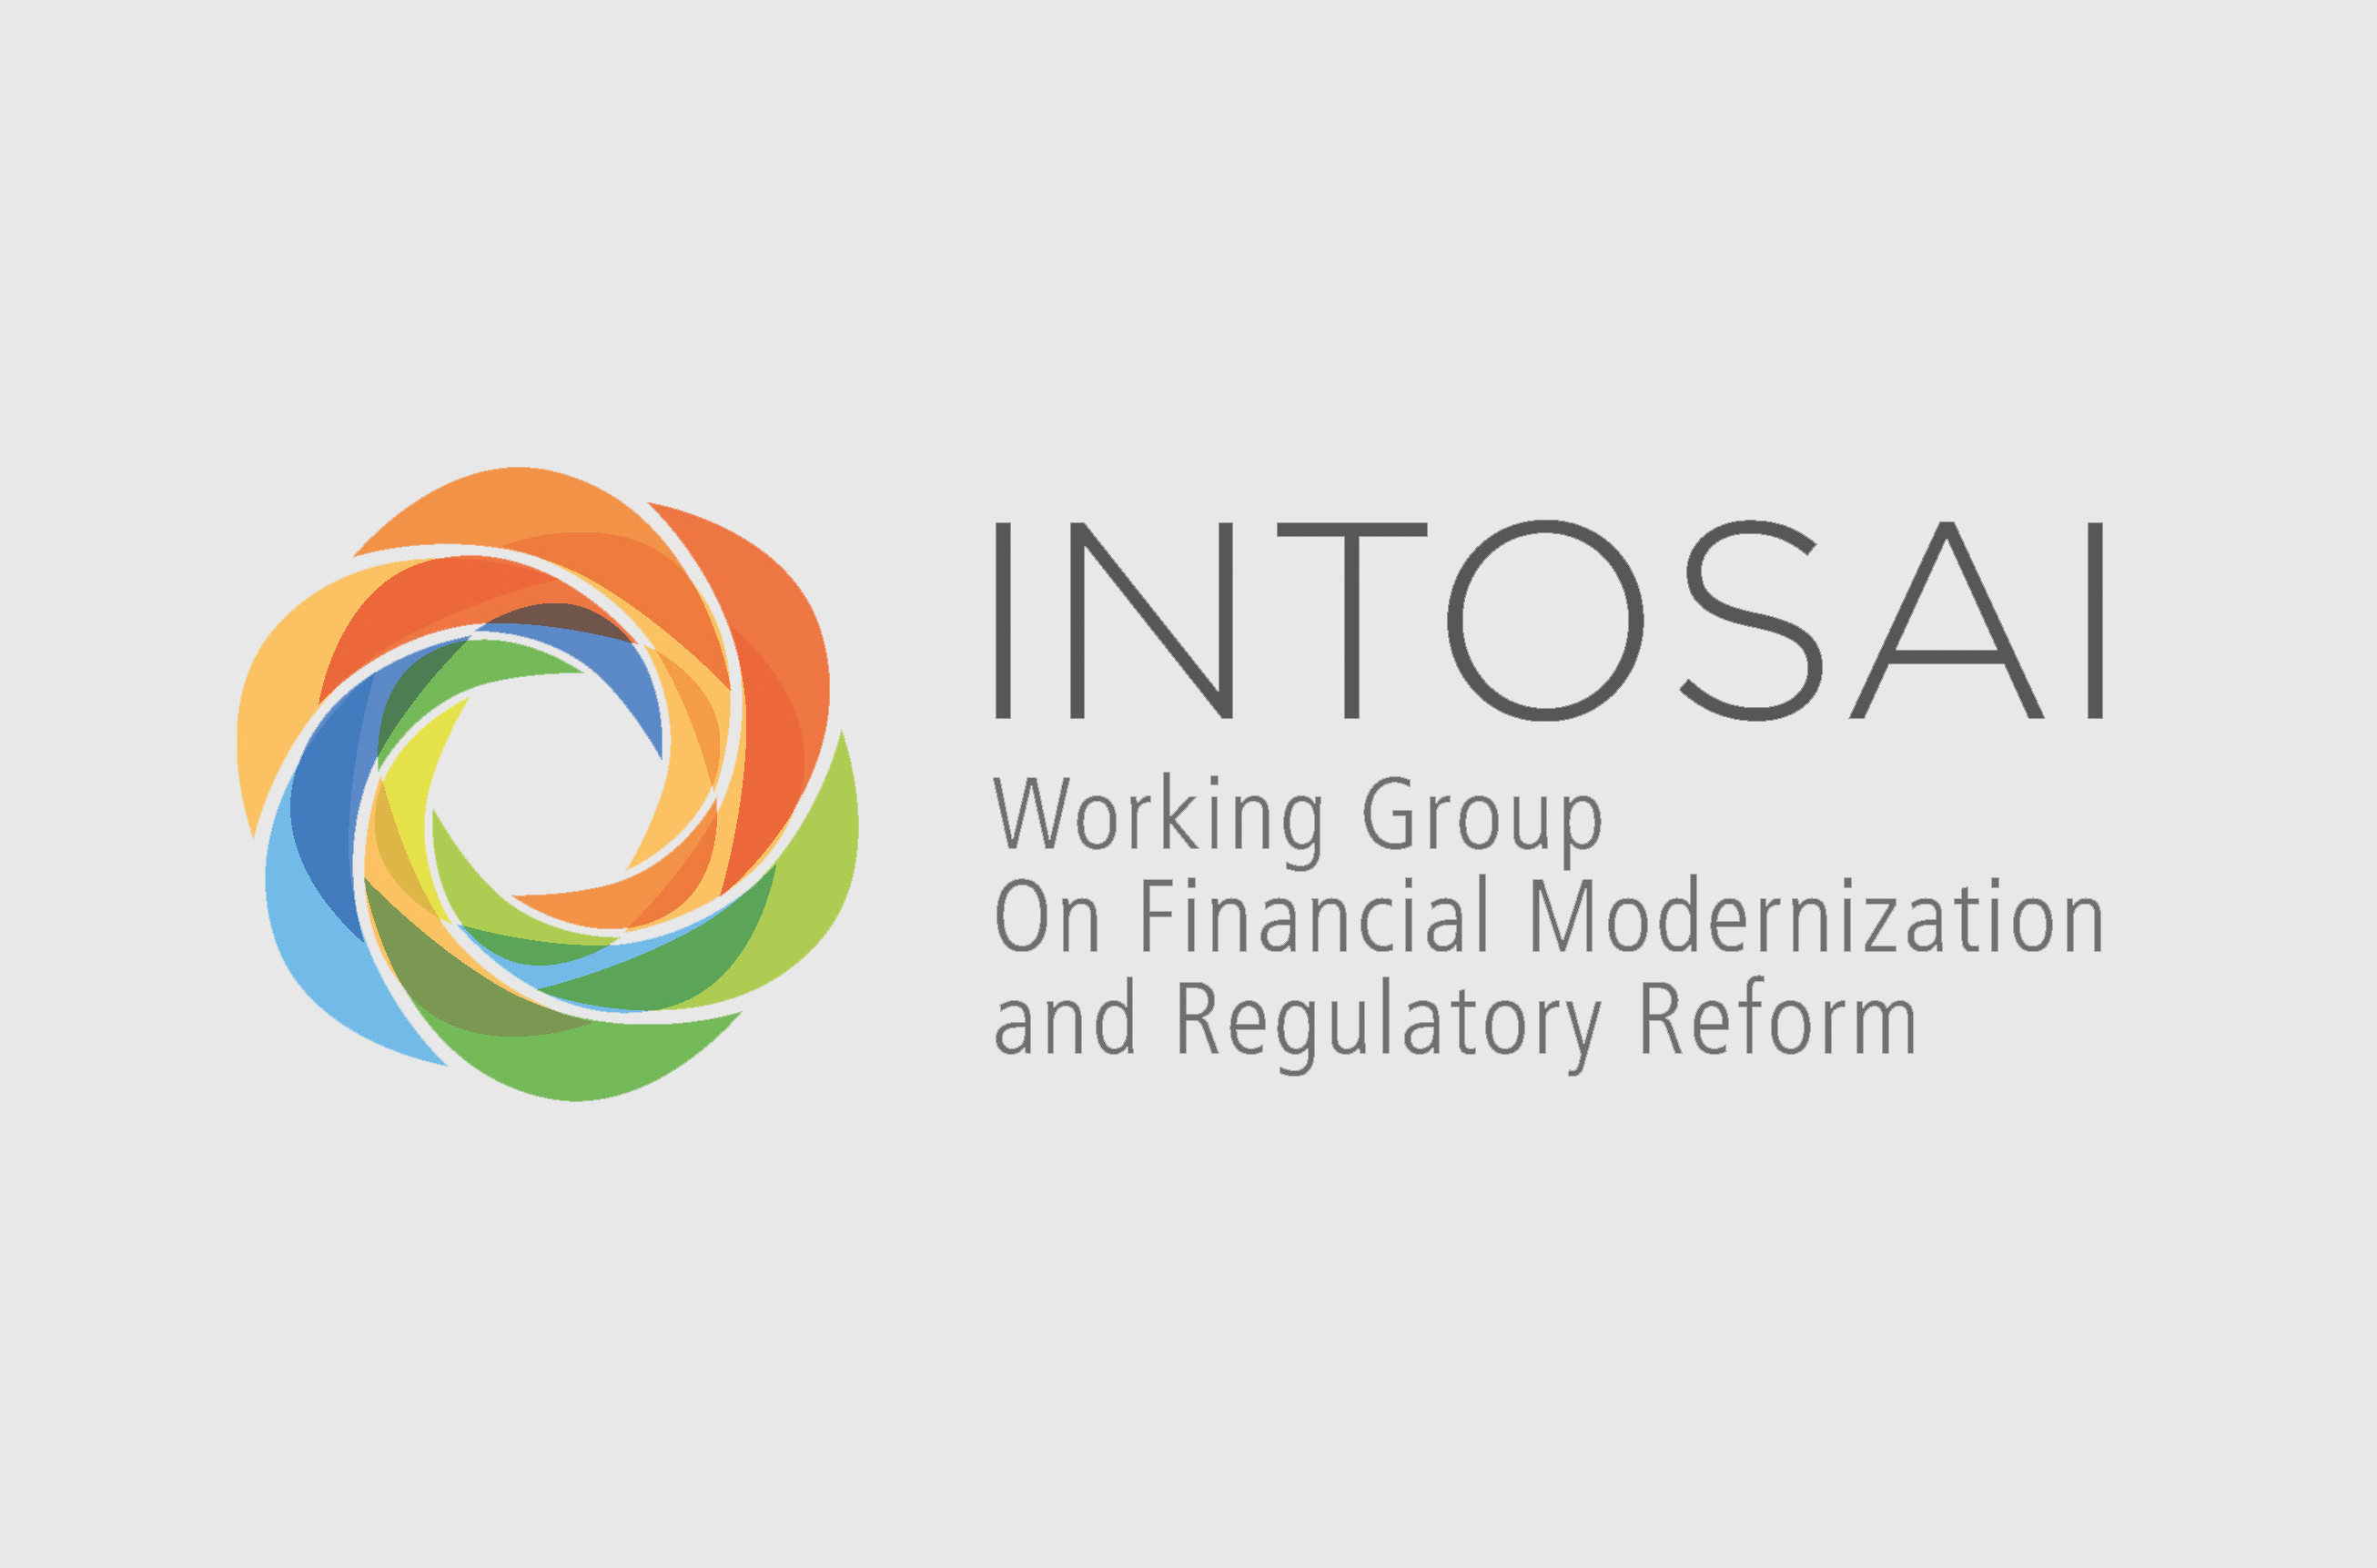 Virtual meeting of INTOSAI Working Group  on Financial Modernization and Regulatory Reform